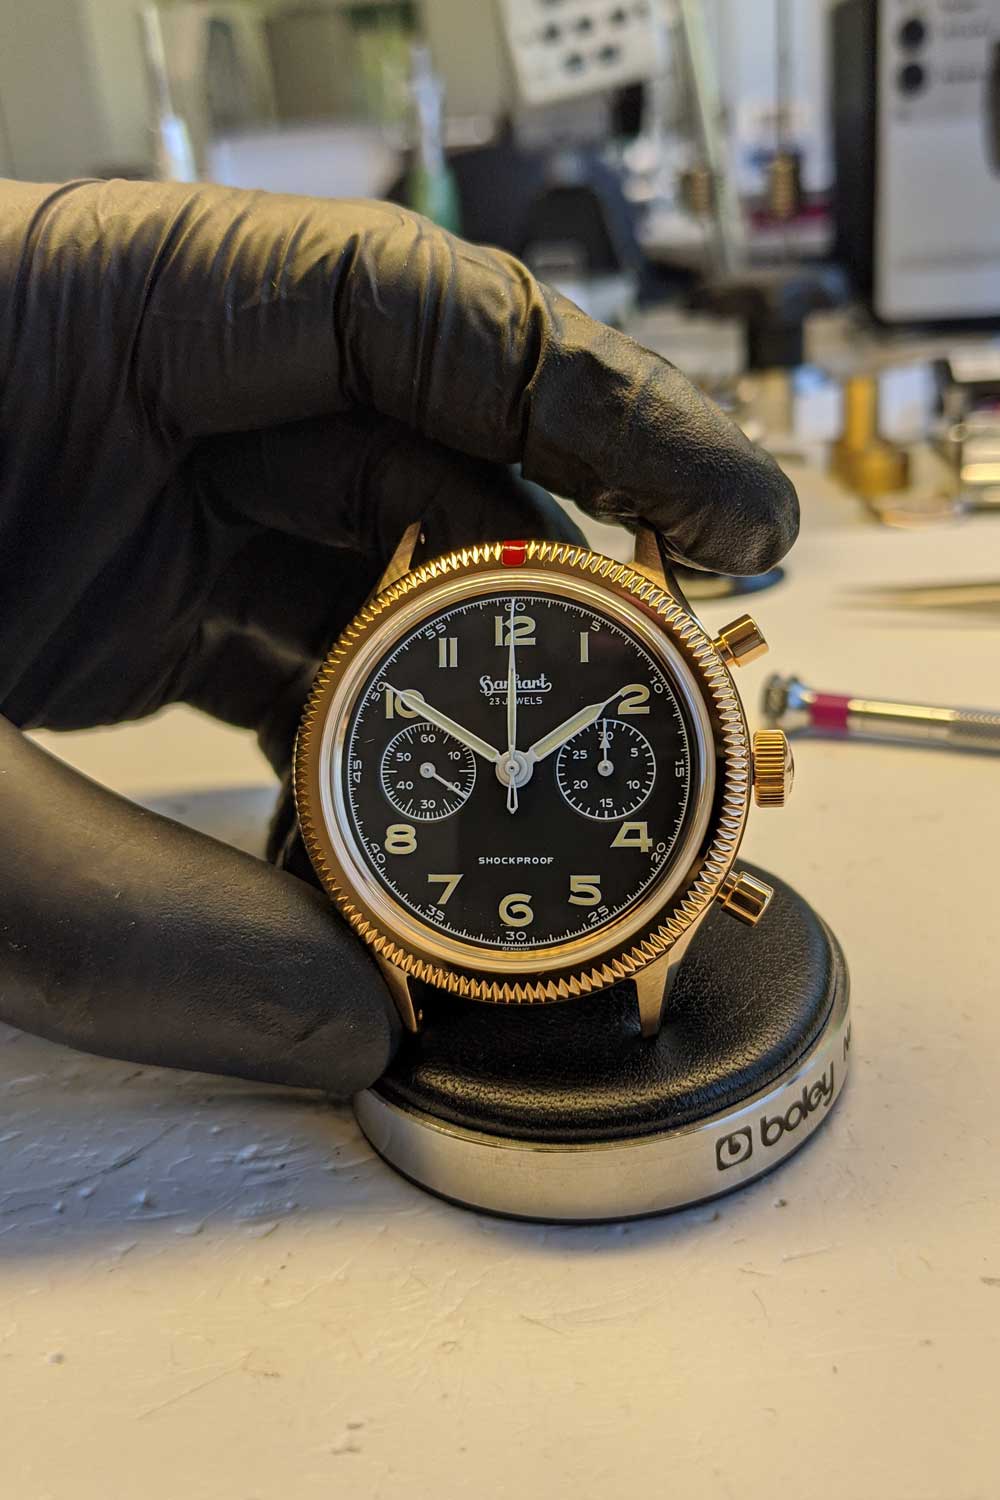 Hand assembled at Hanhart's workshops, The Rake & Revolution Limited Edition Bronze 417 Chronograph seen here cased in its quick-patinating bronze CuSn8 case (Image: Hanhart.com)